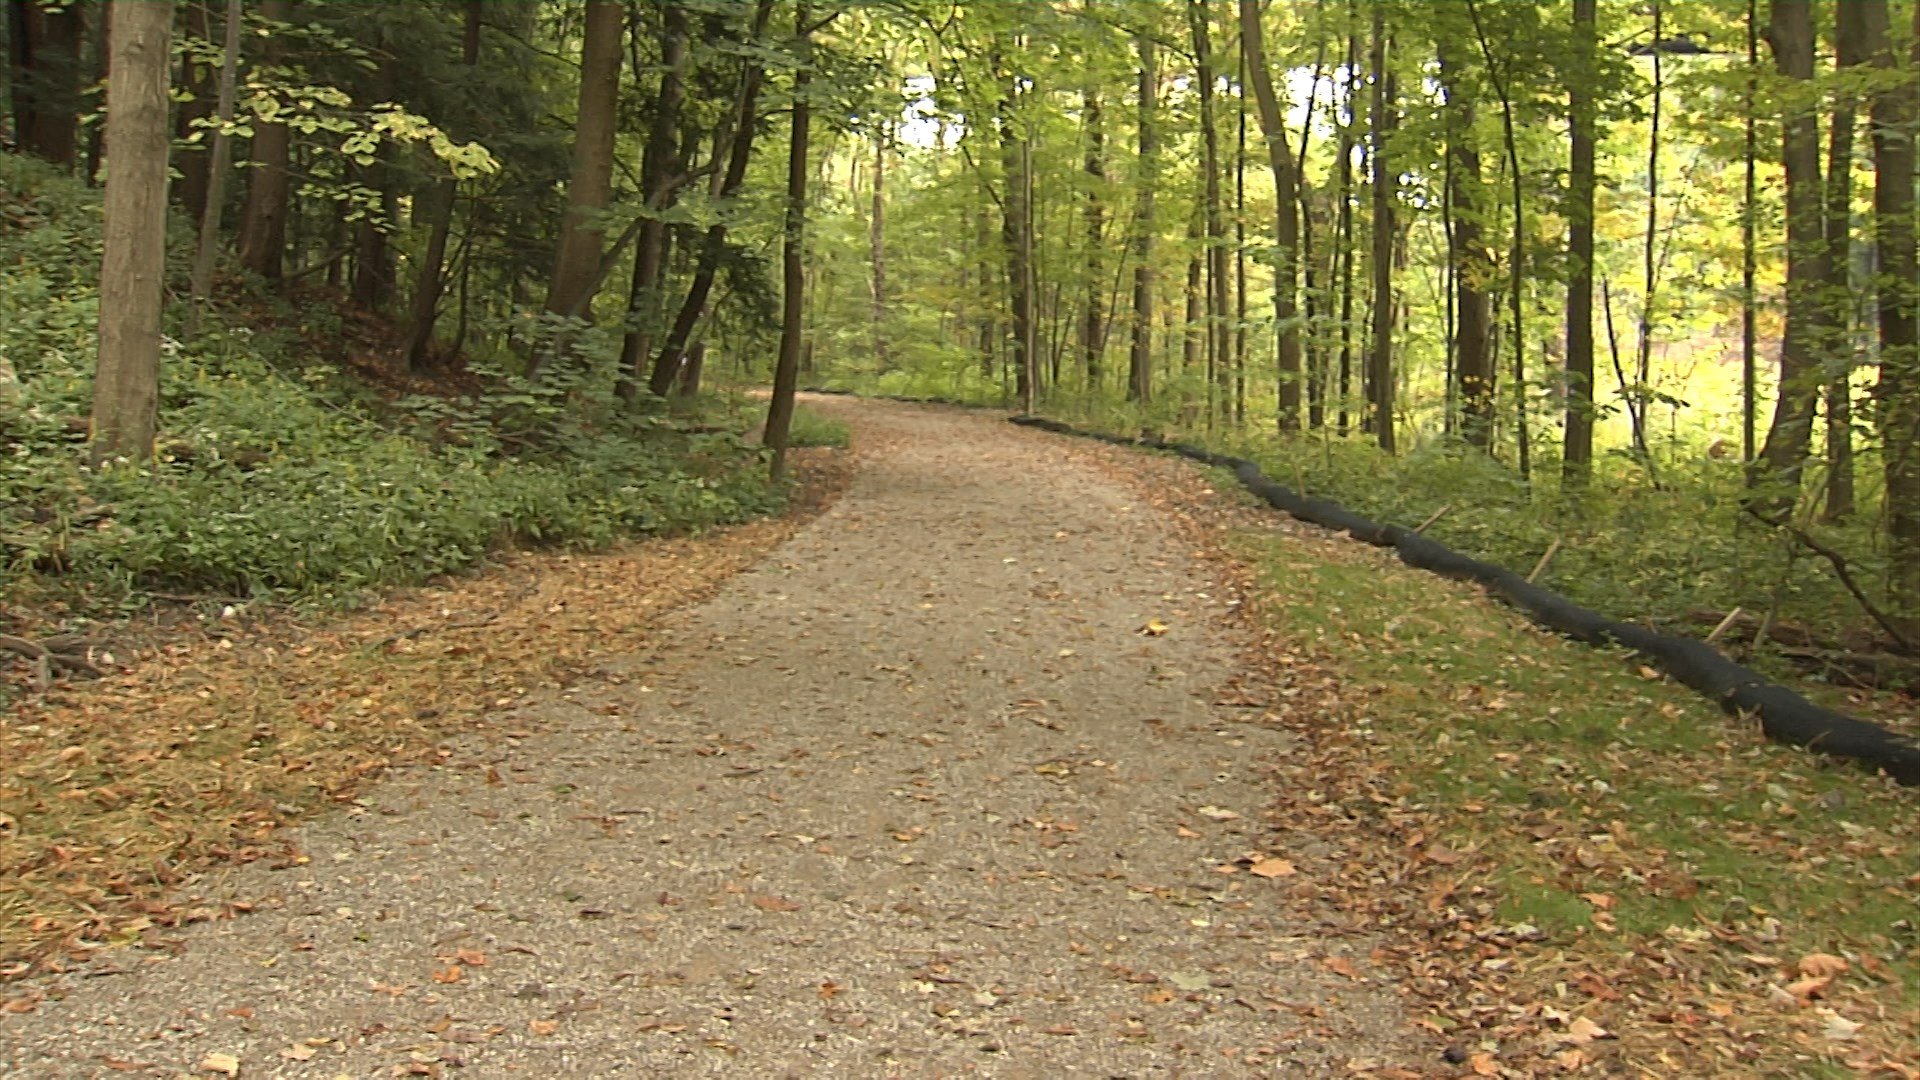 Penn State Behrend Begins Second Phase of Wintergreen Gorge Trail Improvement Project